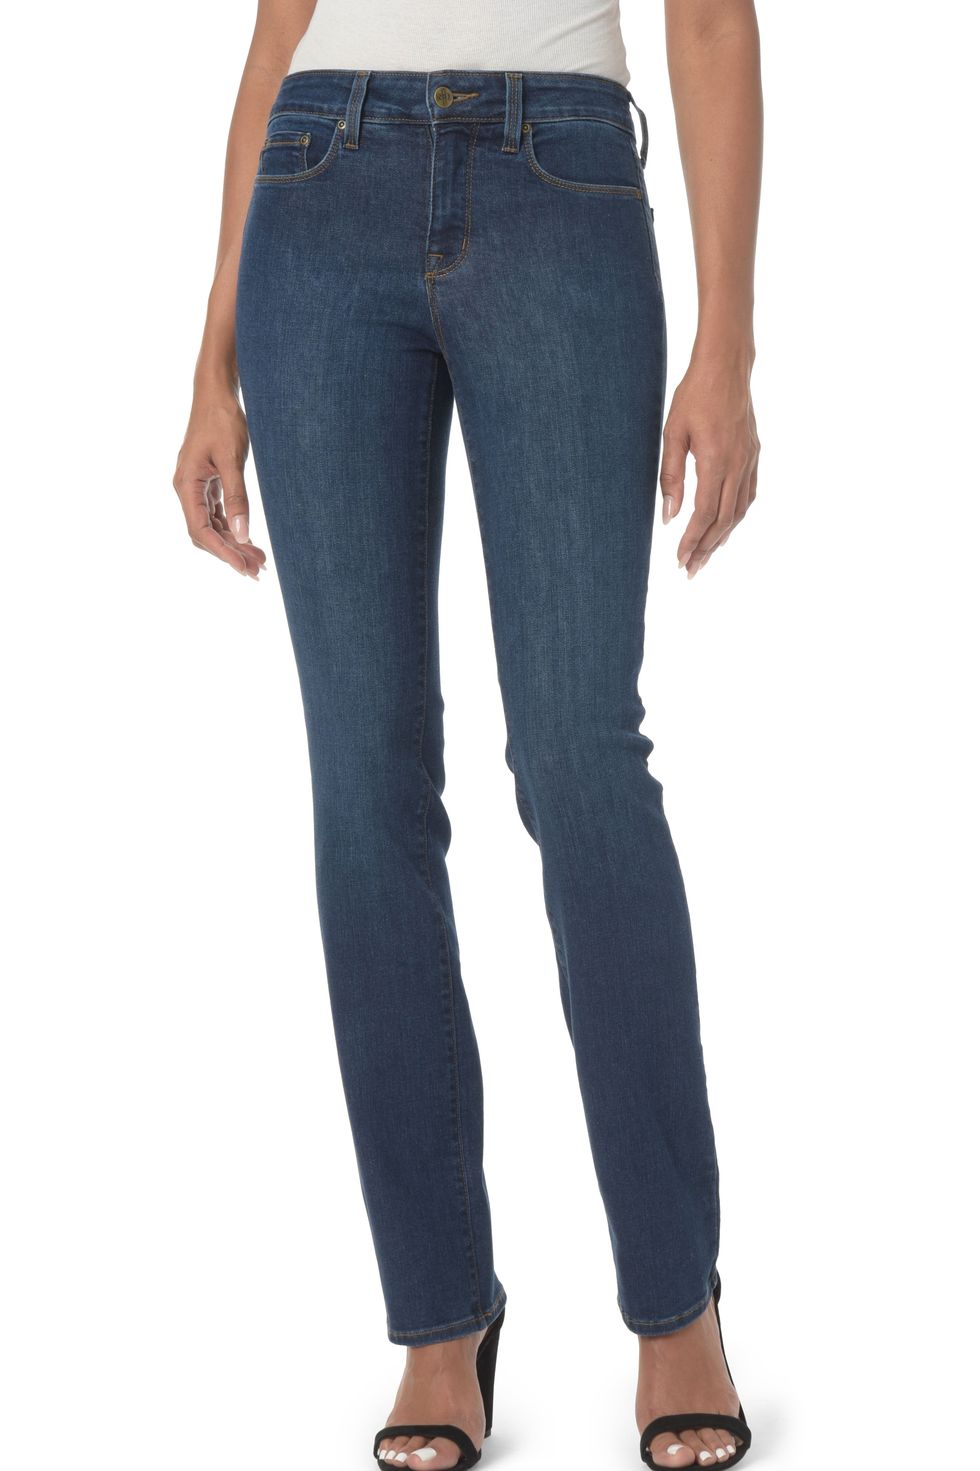 NYDJ Marilyn Straight Jeans Review - Size-Inclusive Denim Jeans